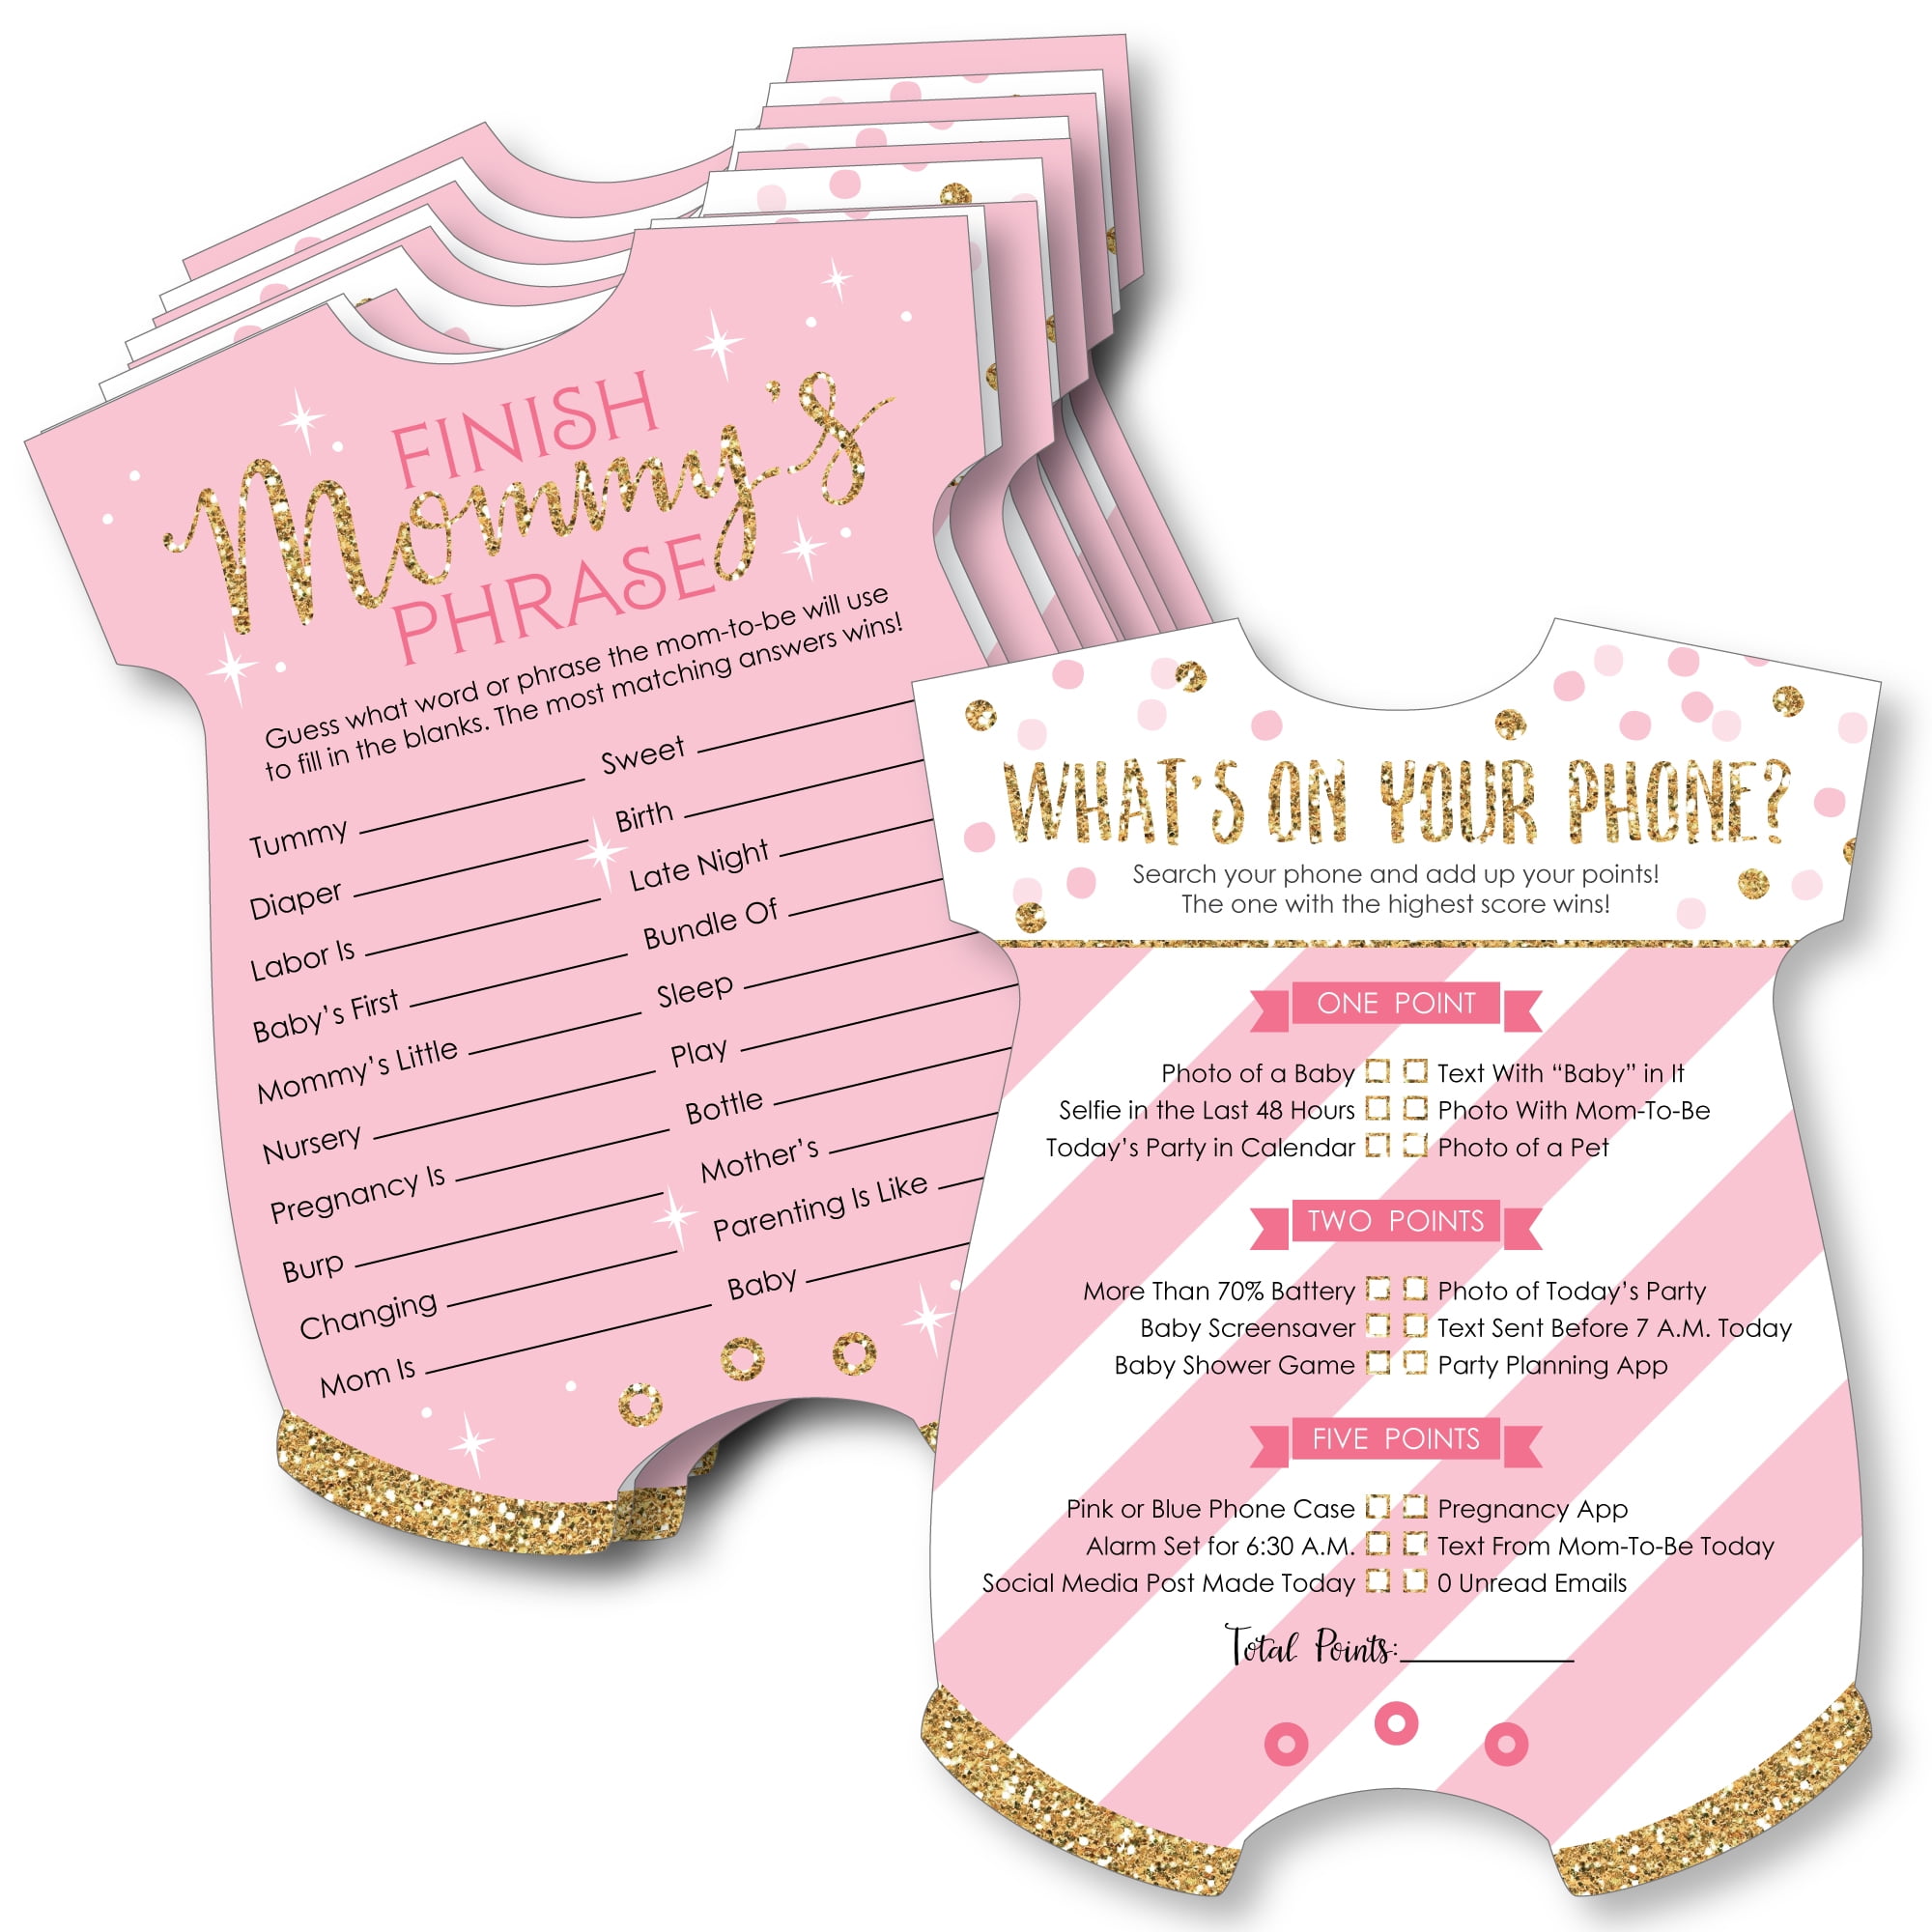 Blush Pink Gold Glitter Baby Shower Blank Invitations with Envelopes, 20ct  